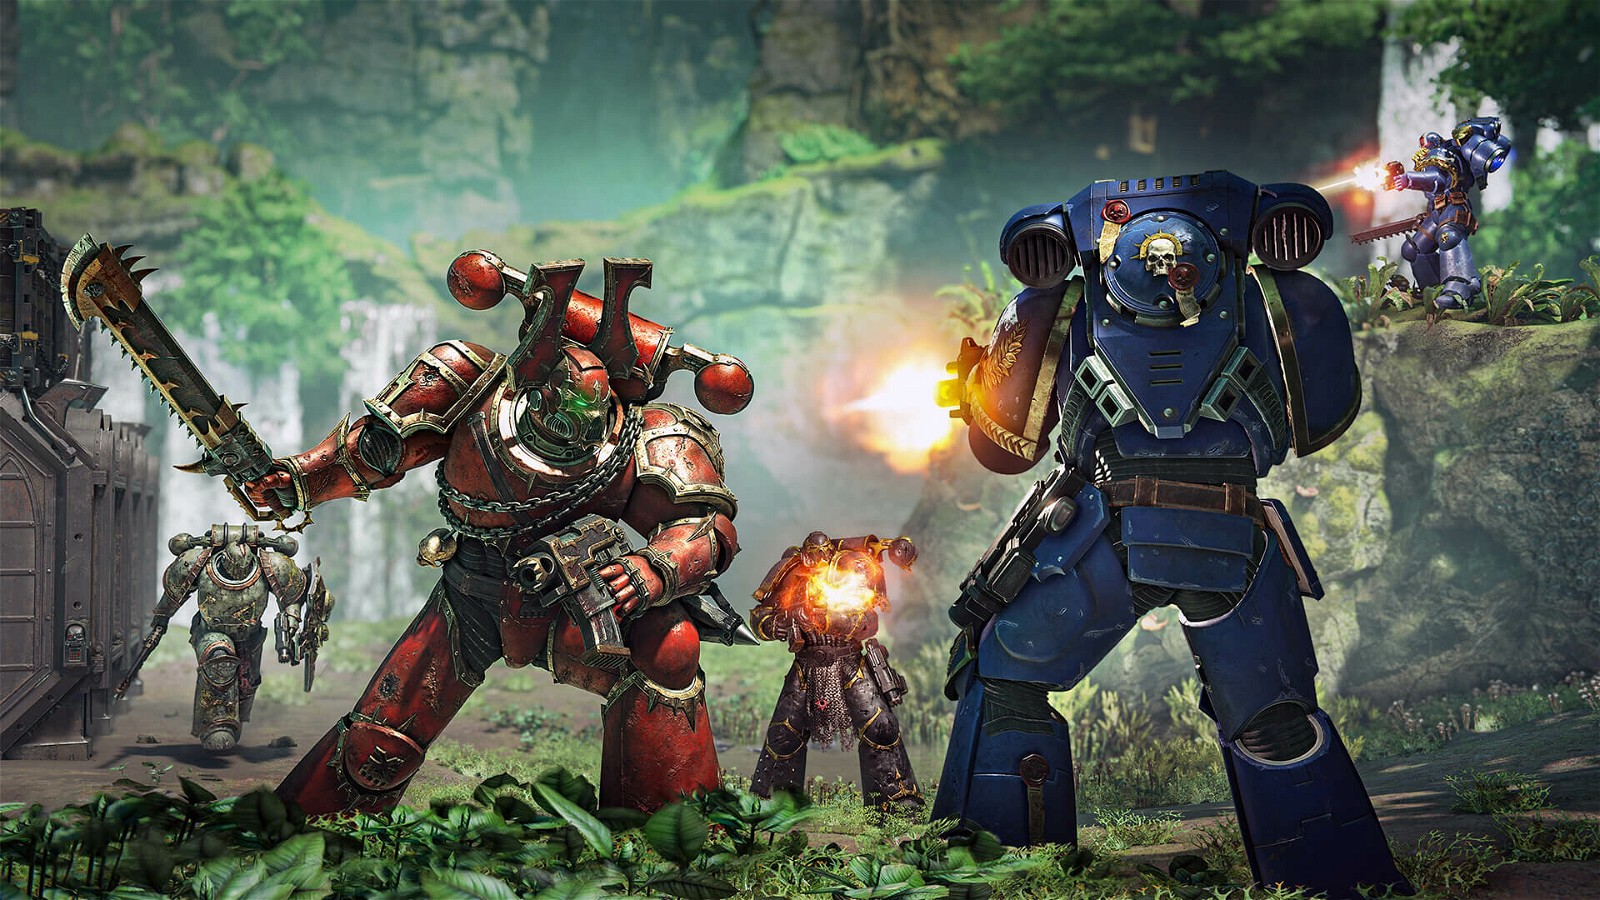 Space Marine 2's Multiplayer Might Be Its Biggest Strengths